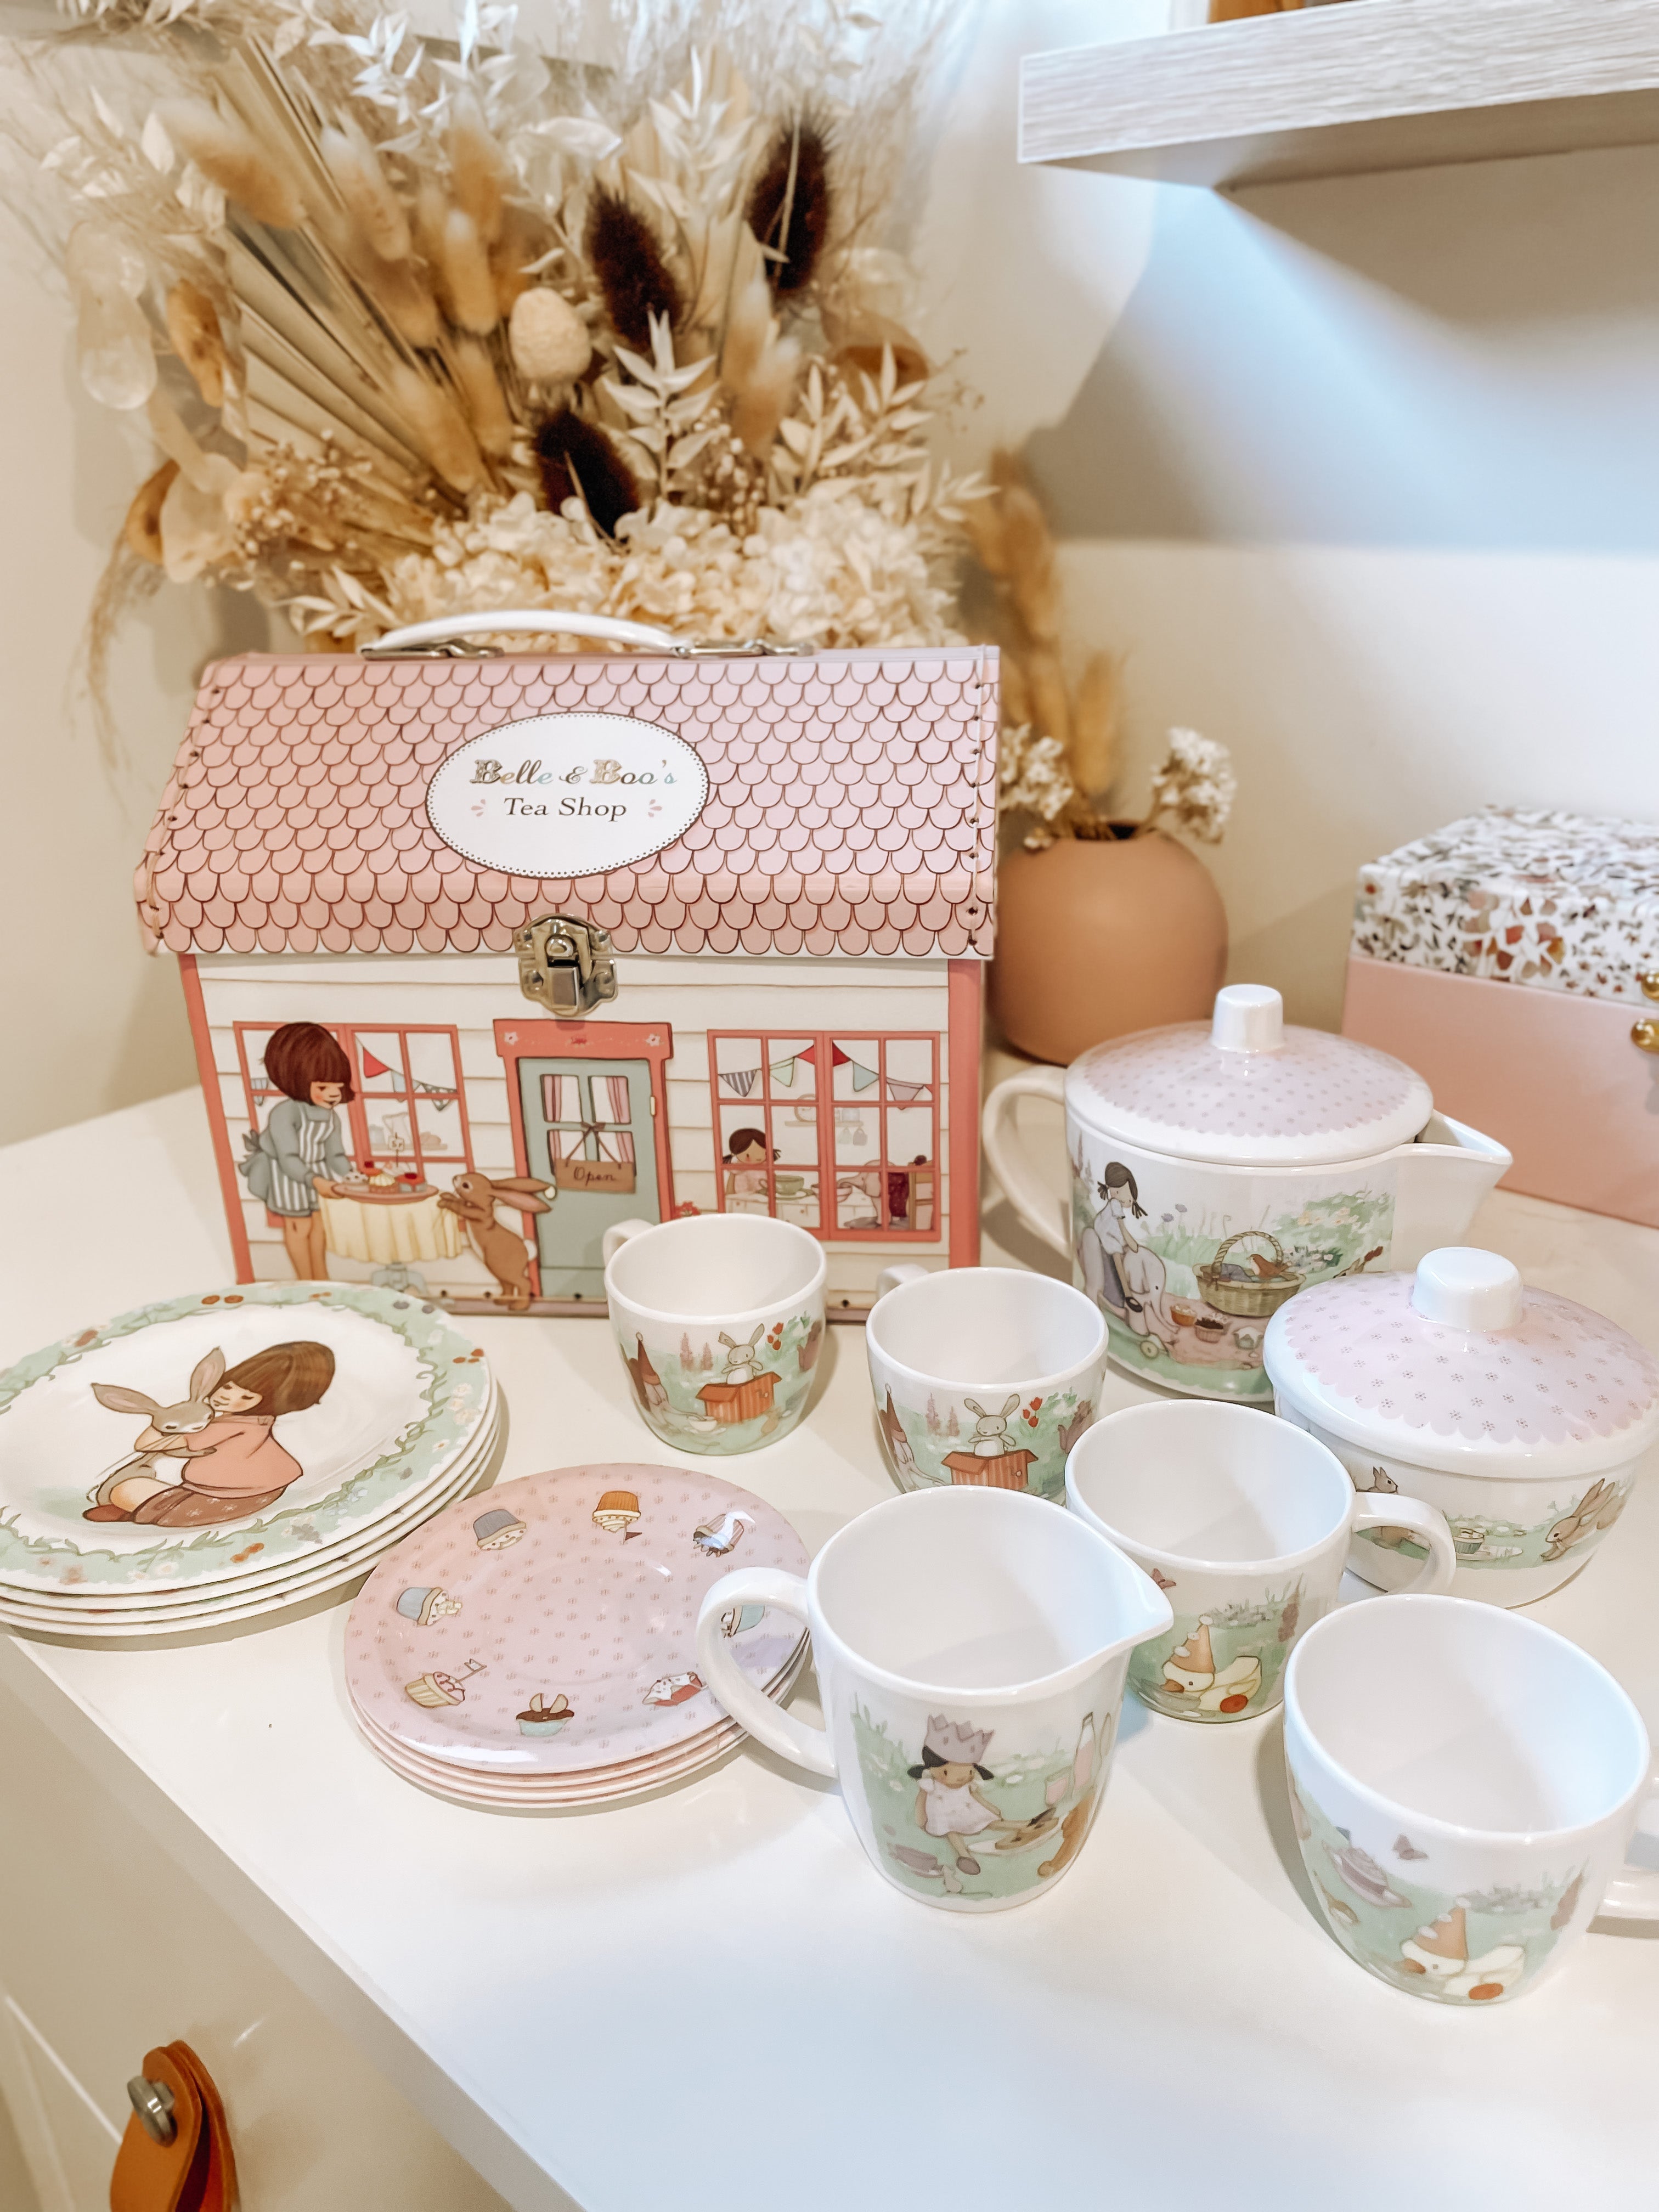 Playful　House　Belle　The　Set　by　Boo　Tea　Box　in　Melamine　Collective